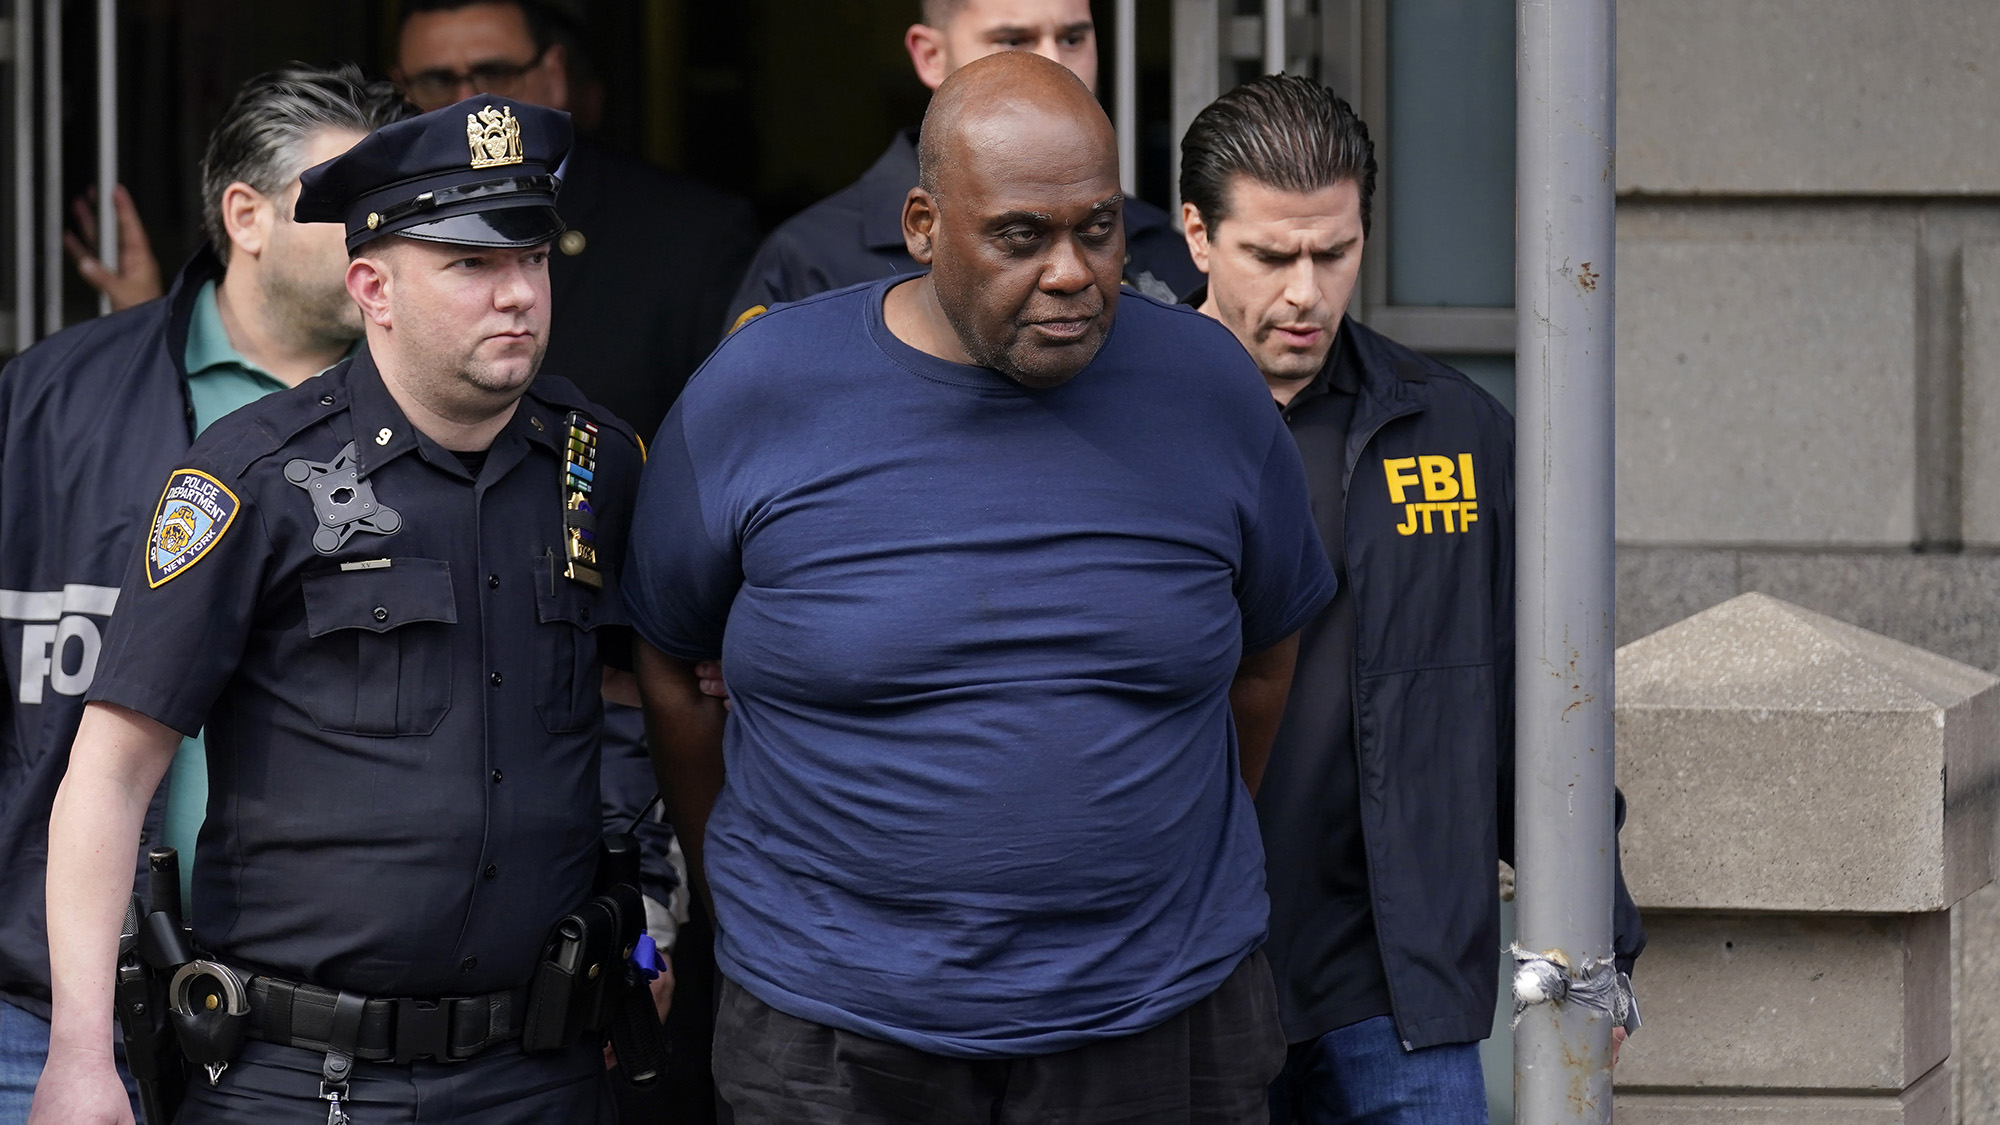 New York City Police and law enforcement officials lead subway shooting suspect Frank R. James, 62, center, away from a police station, in New York on Wednesday, April 13.